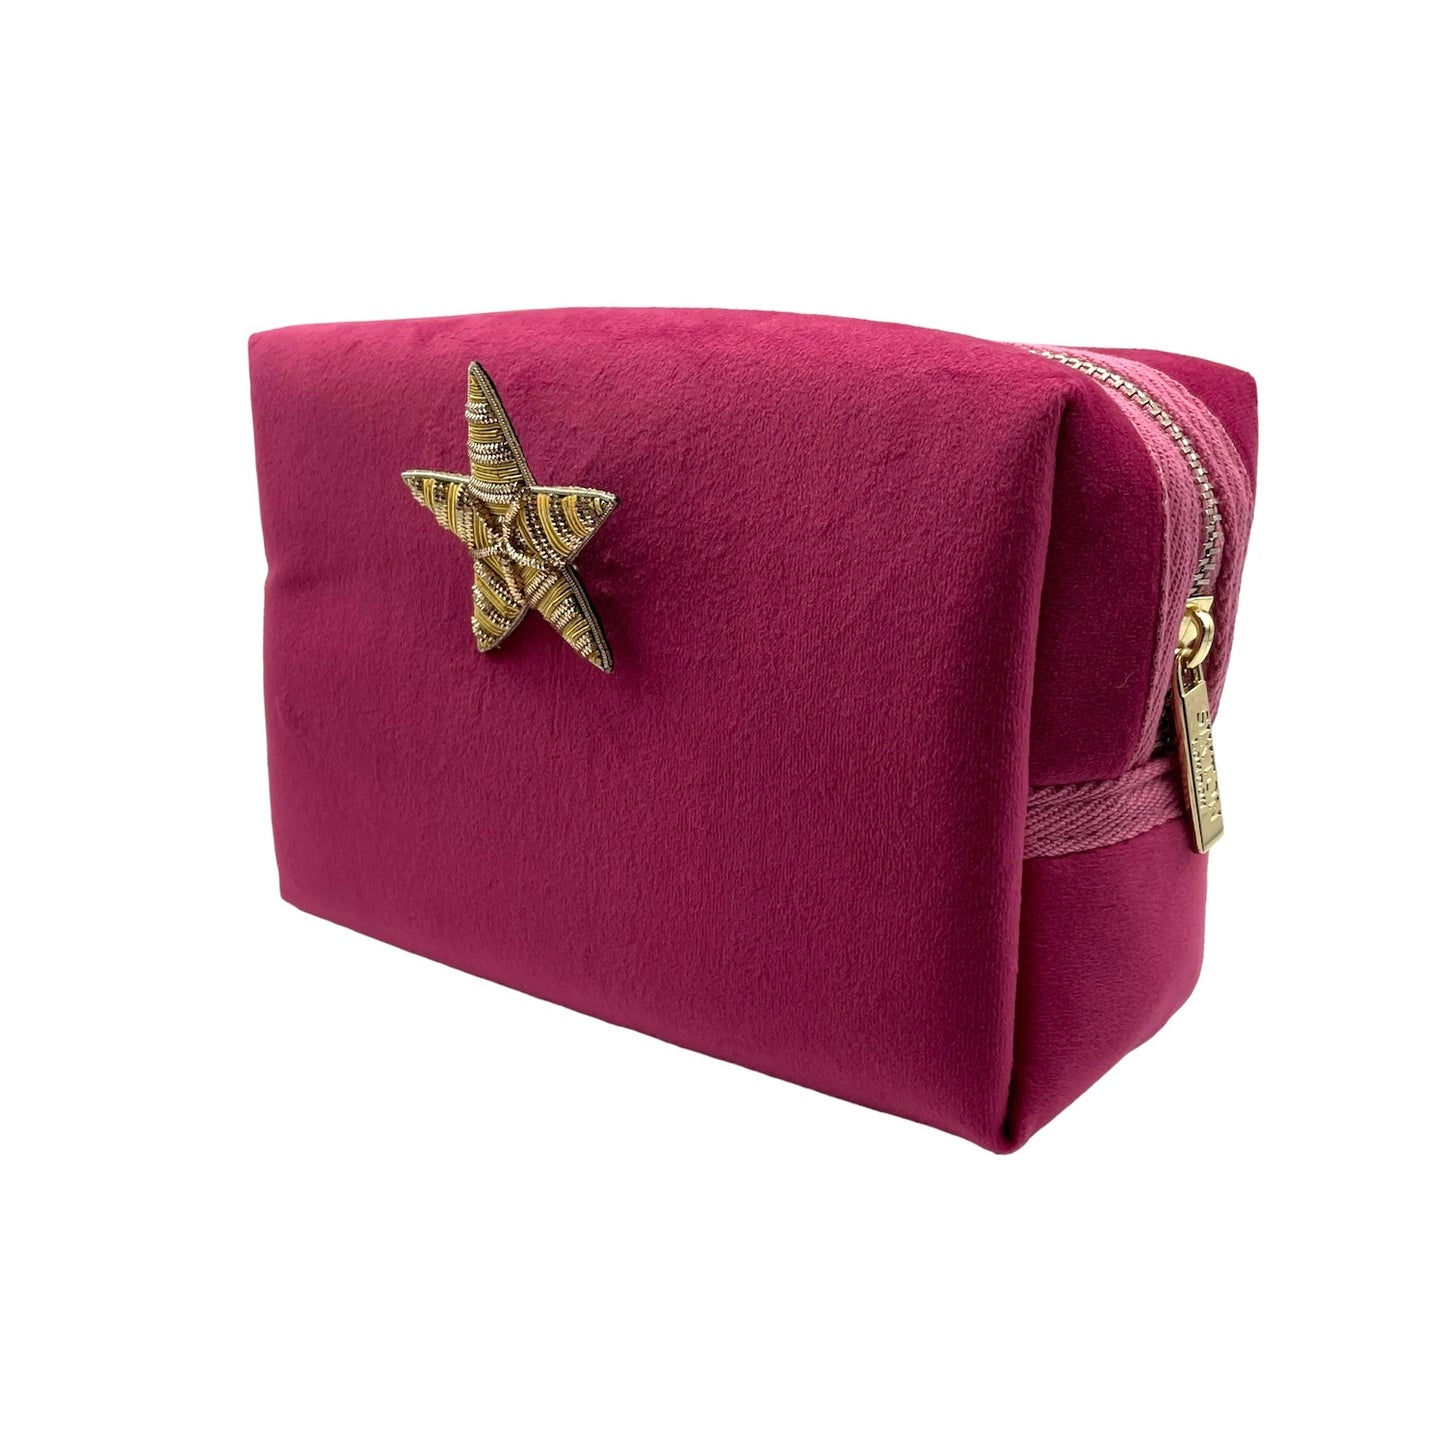 Bright pink make-up bag and a gold star pin - recycled velvet